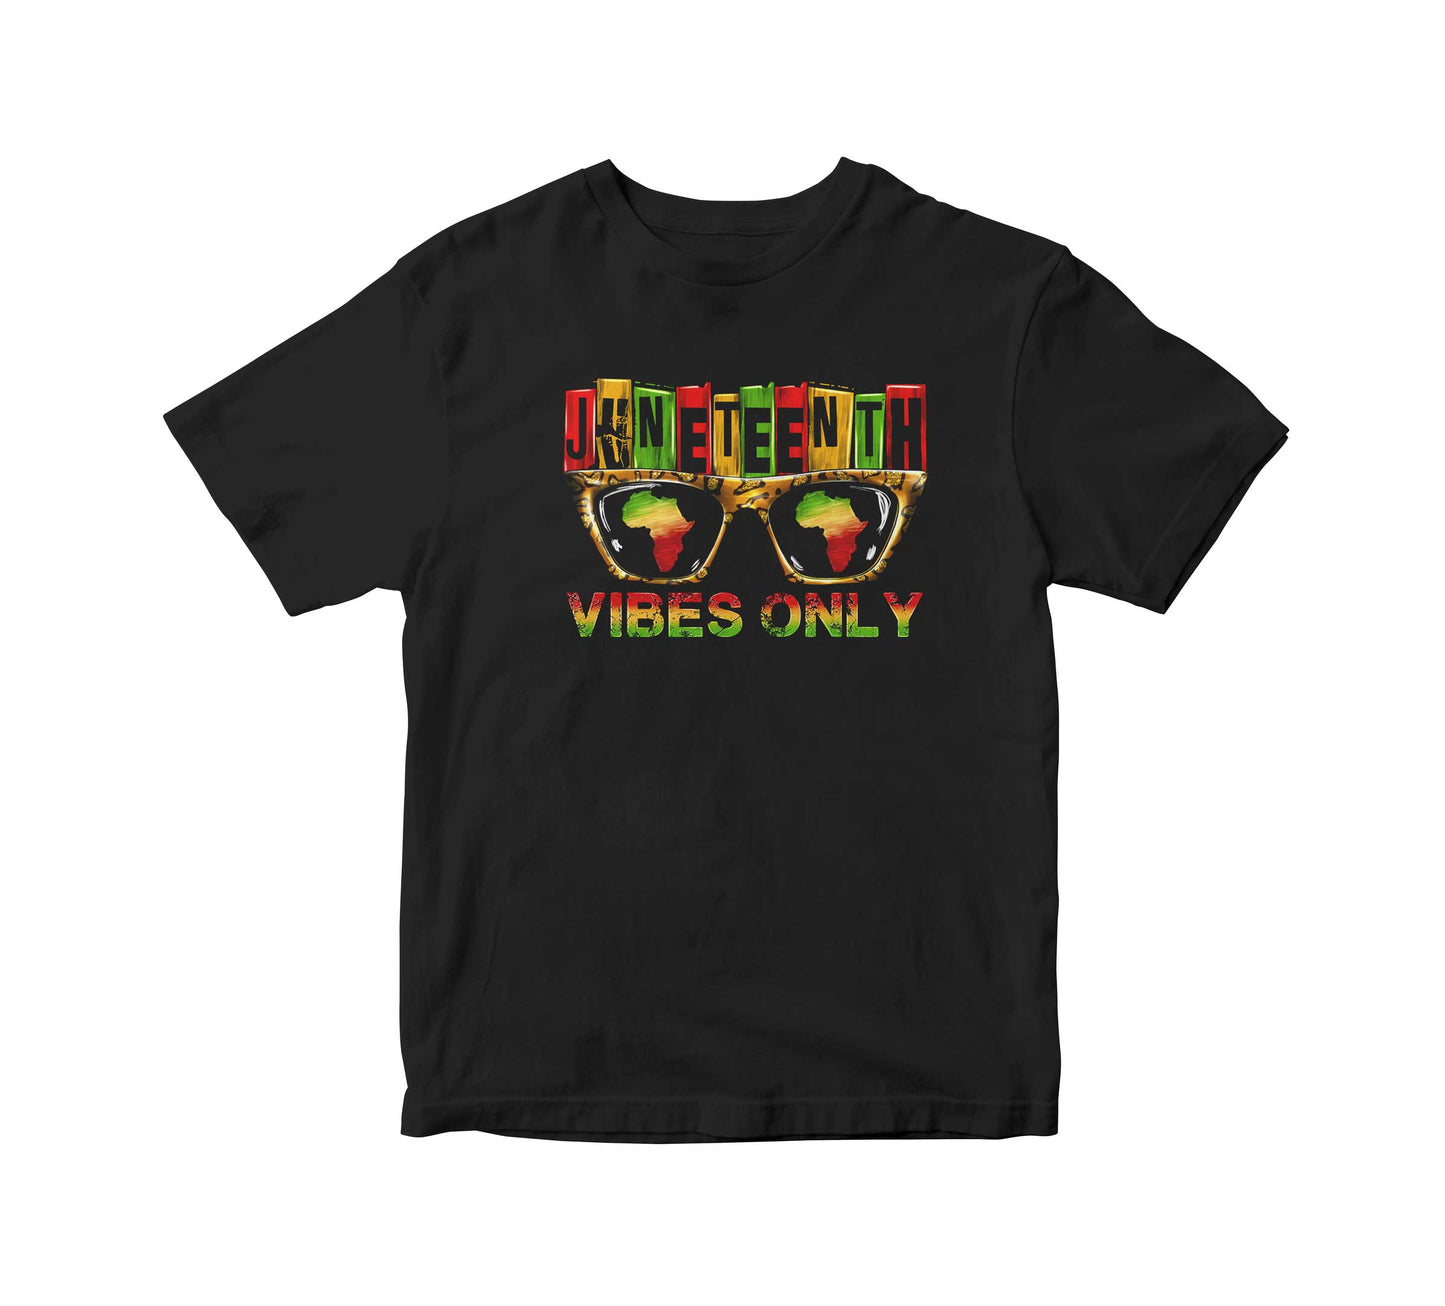 Juneteenth Vibes Only Adult Unisex T-Shirt